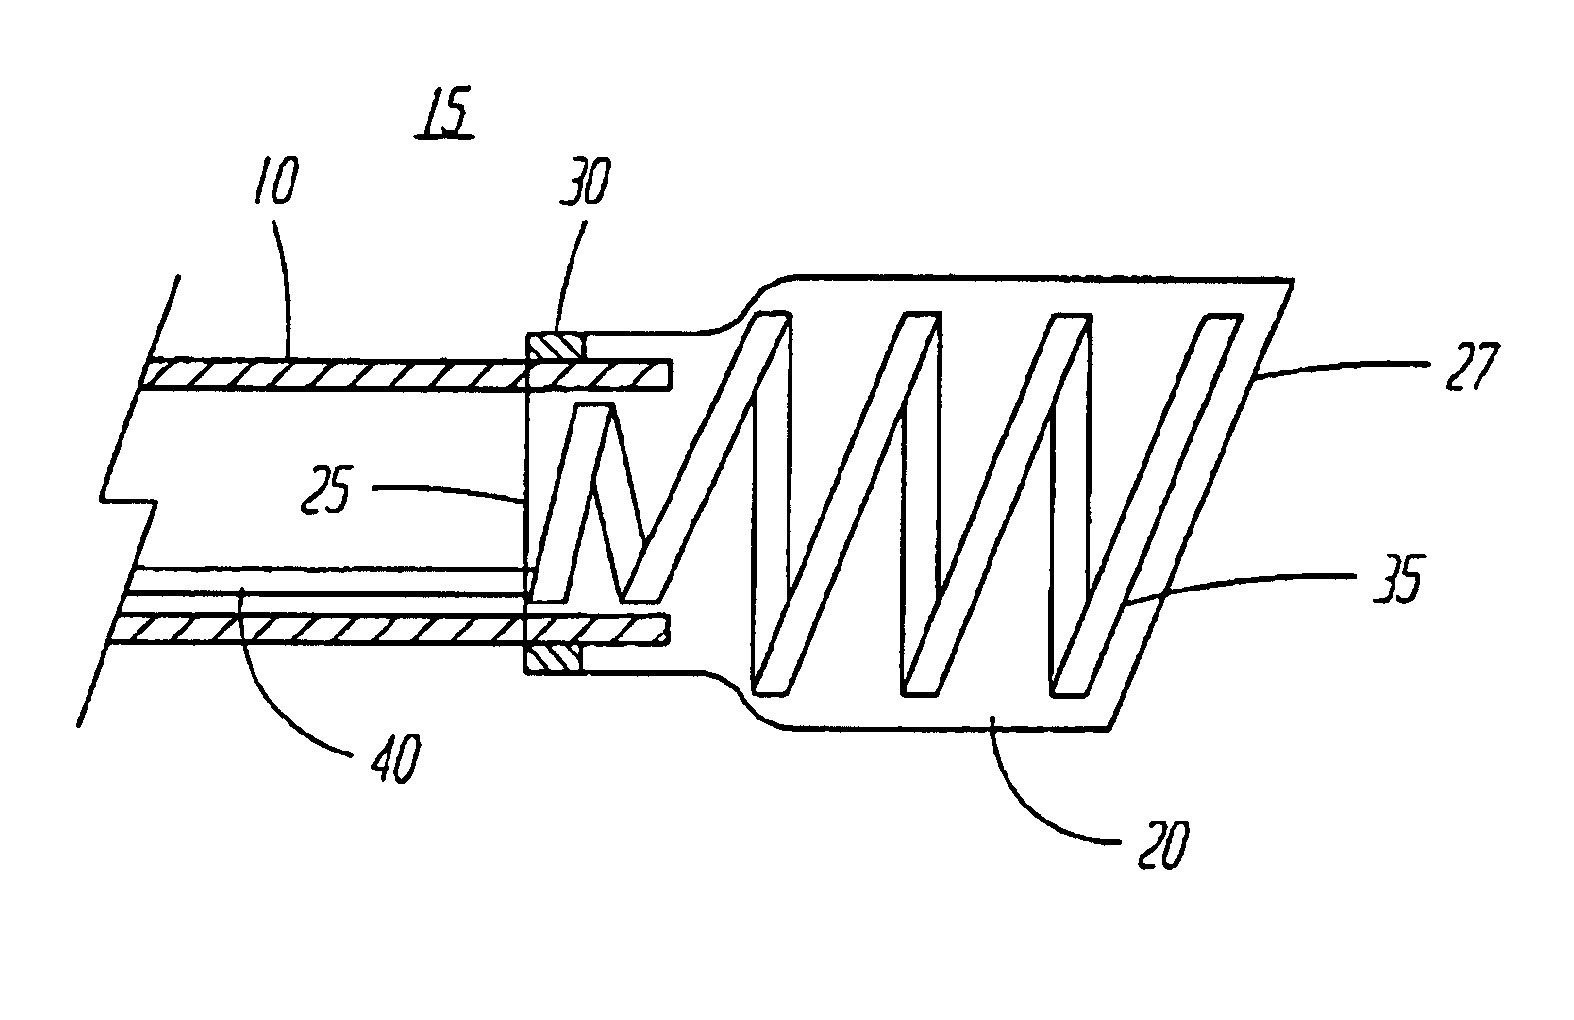 Systems and methods for detaching a covering from an implantable medical device